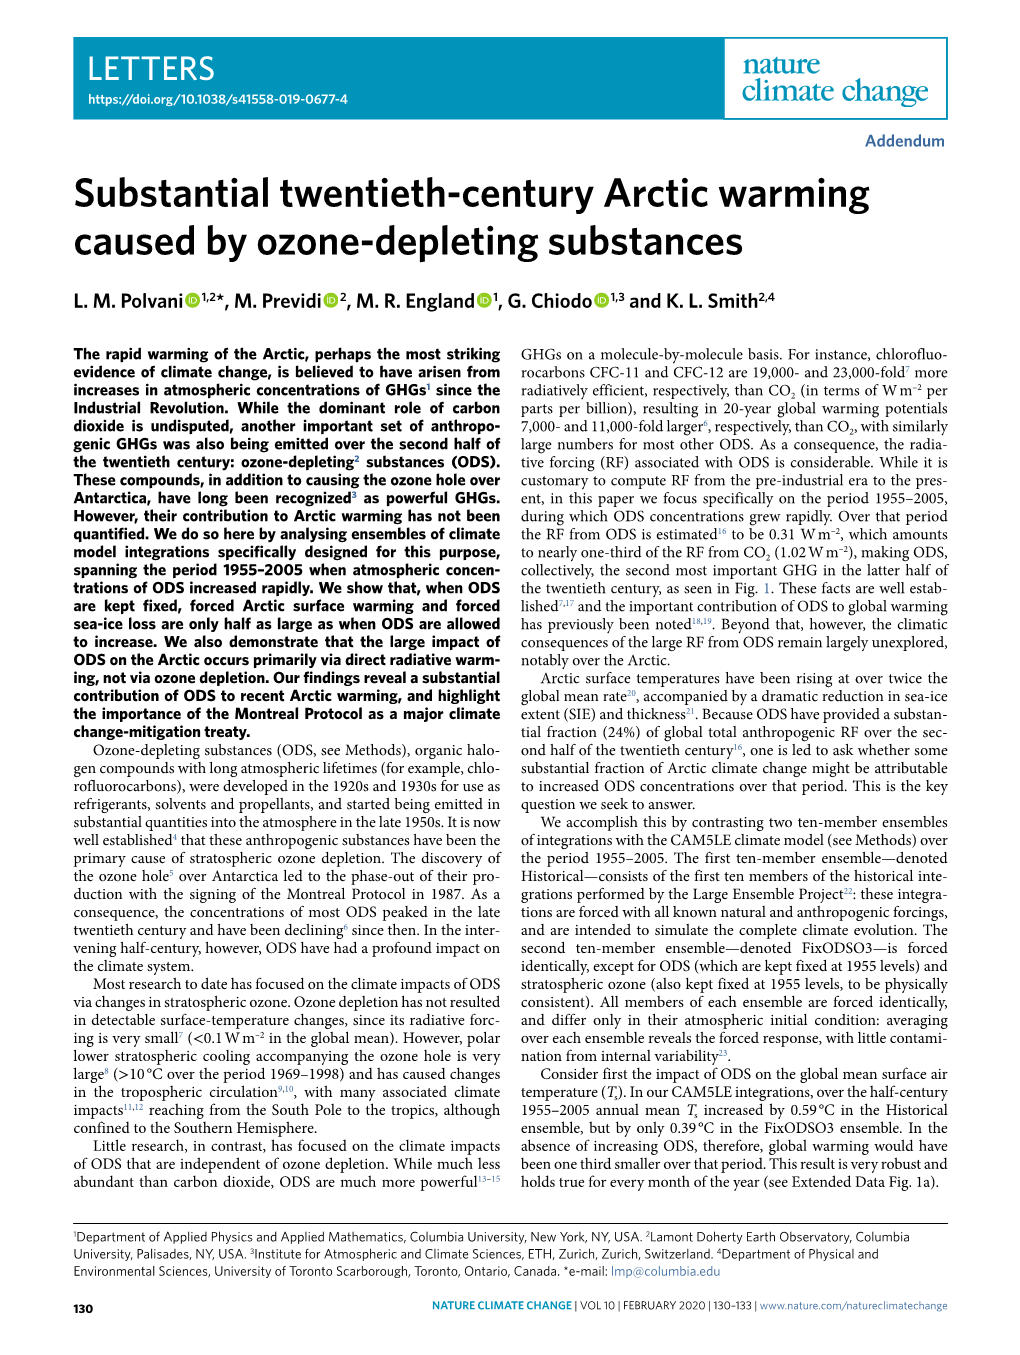 Substantial Twentieth-Century Arctic Warming Caused by Ozone-Depleting Substances